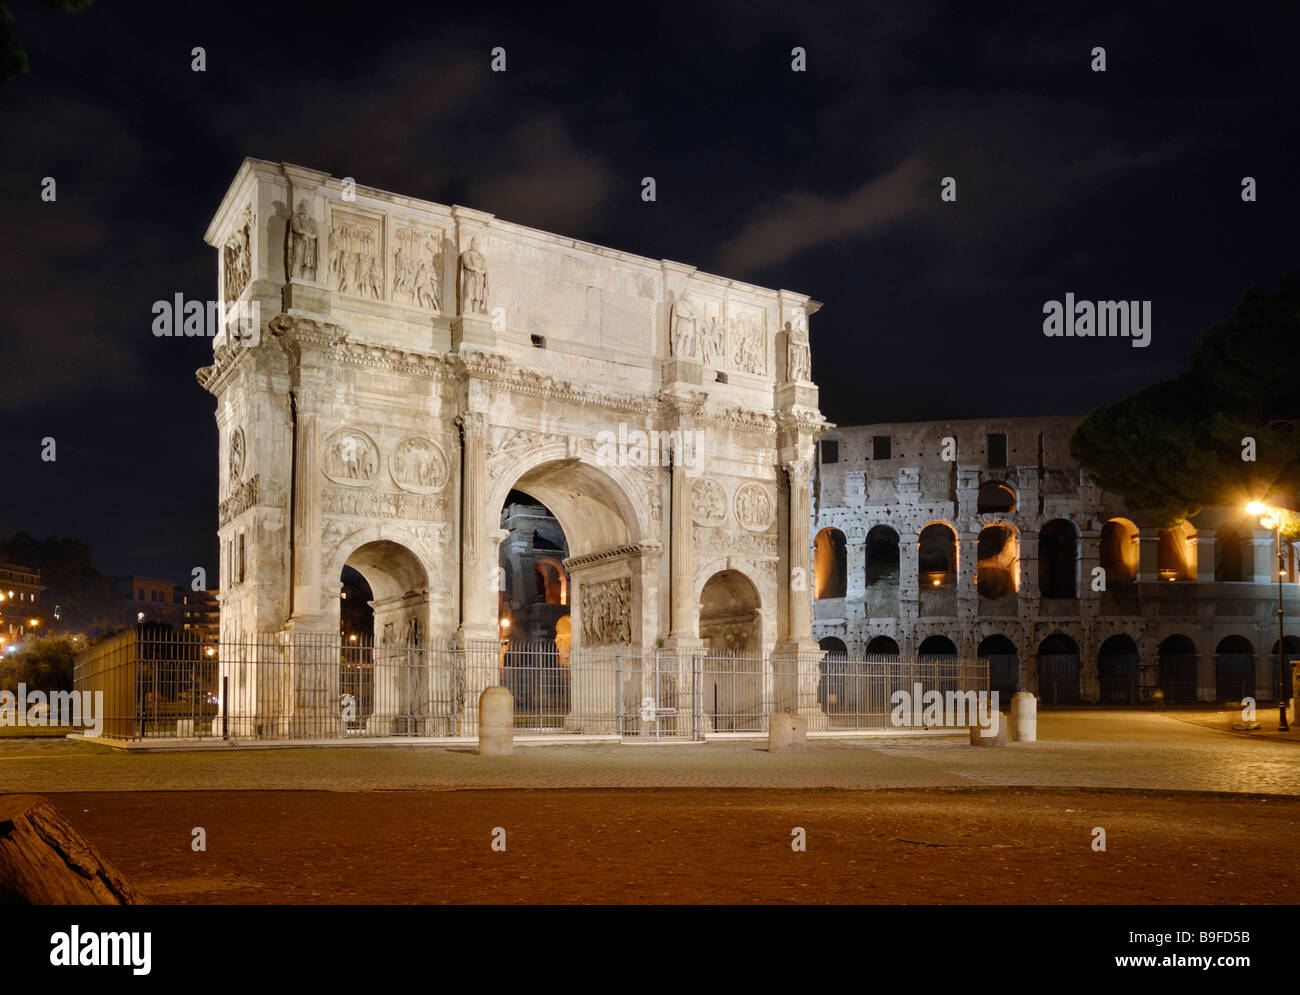 Triumphal arch lit up at night, Arch of Constantine, Rome, Latium, Italy Stock Photo